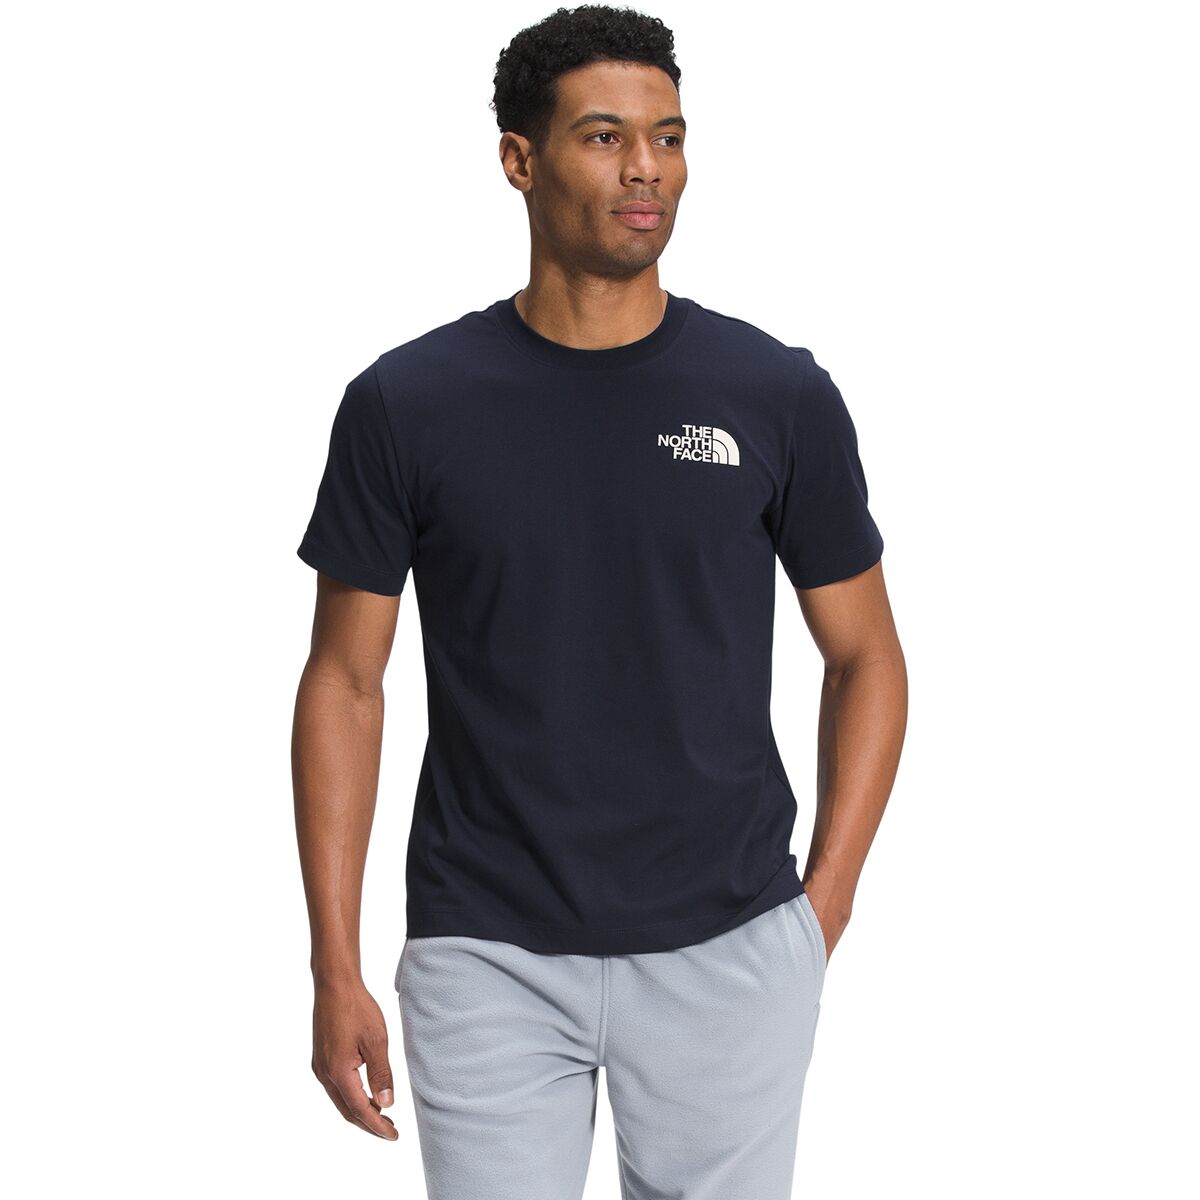 The North Face Climb Graphic T-Shirt - Men's